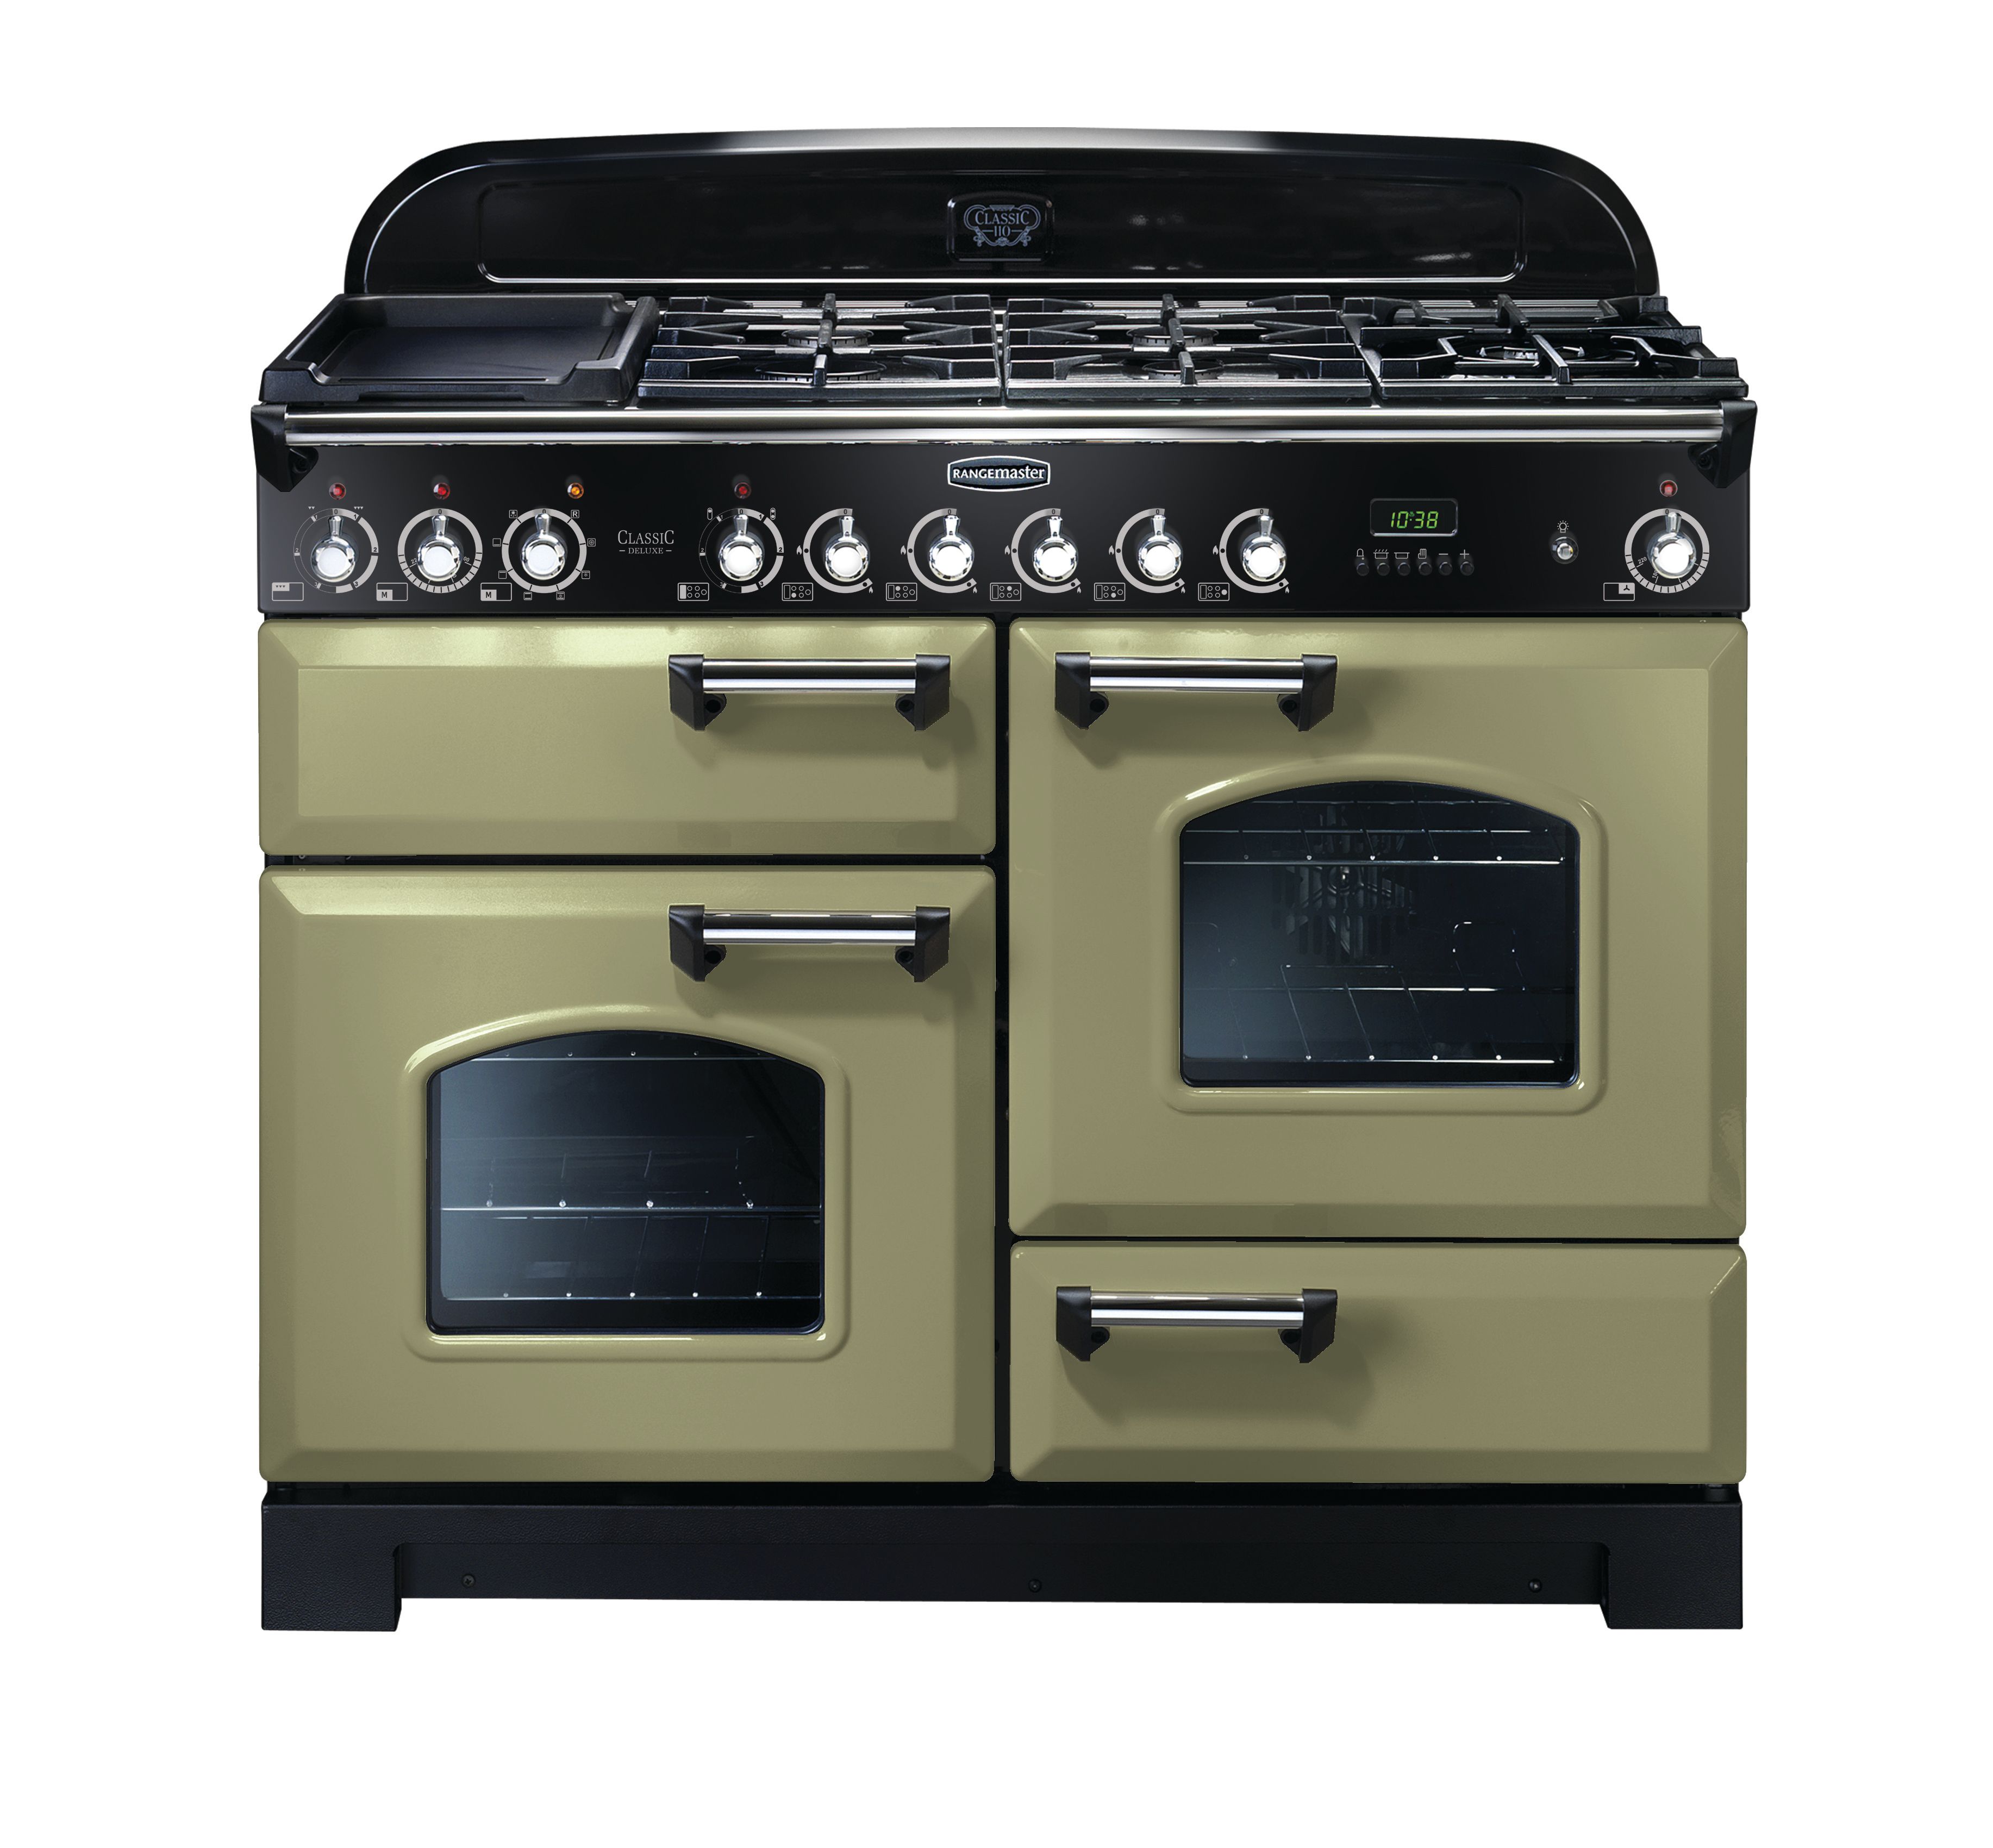 Rangemaster Classic Deluxe CDL110DFFOG/C 110cm Dual Fuel Range Cooker - Olive Green / Chrome - A/A Rated, Green